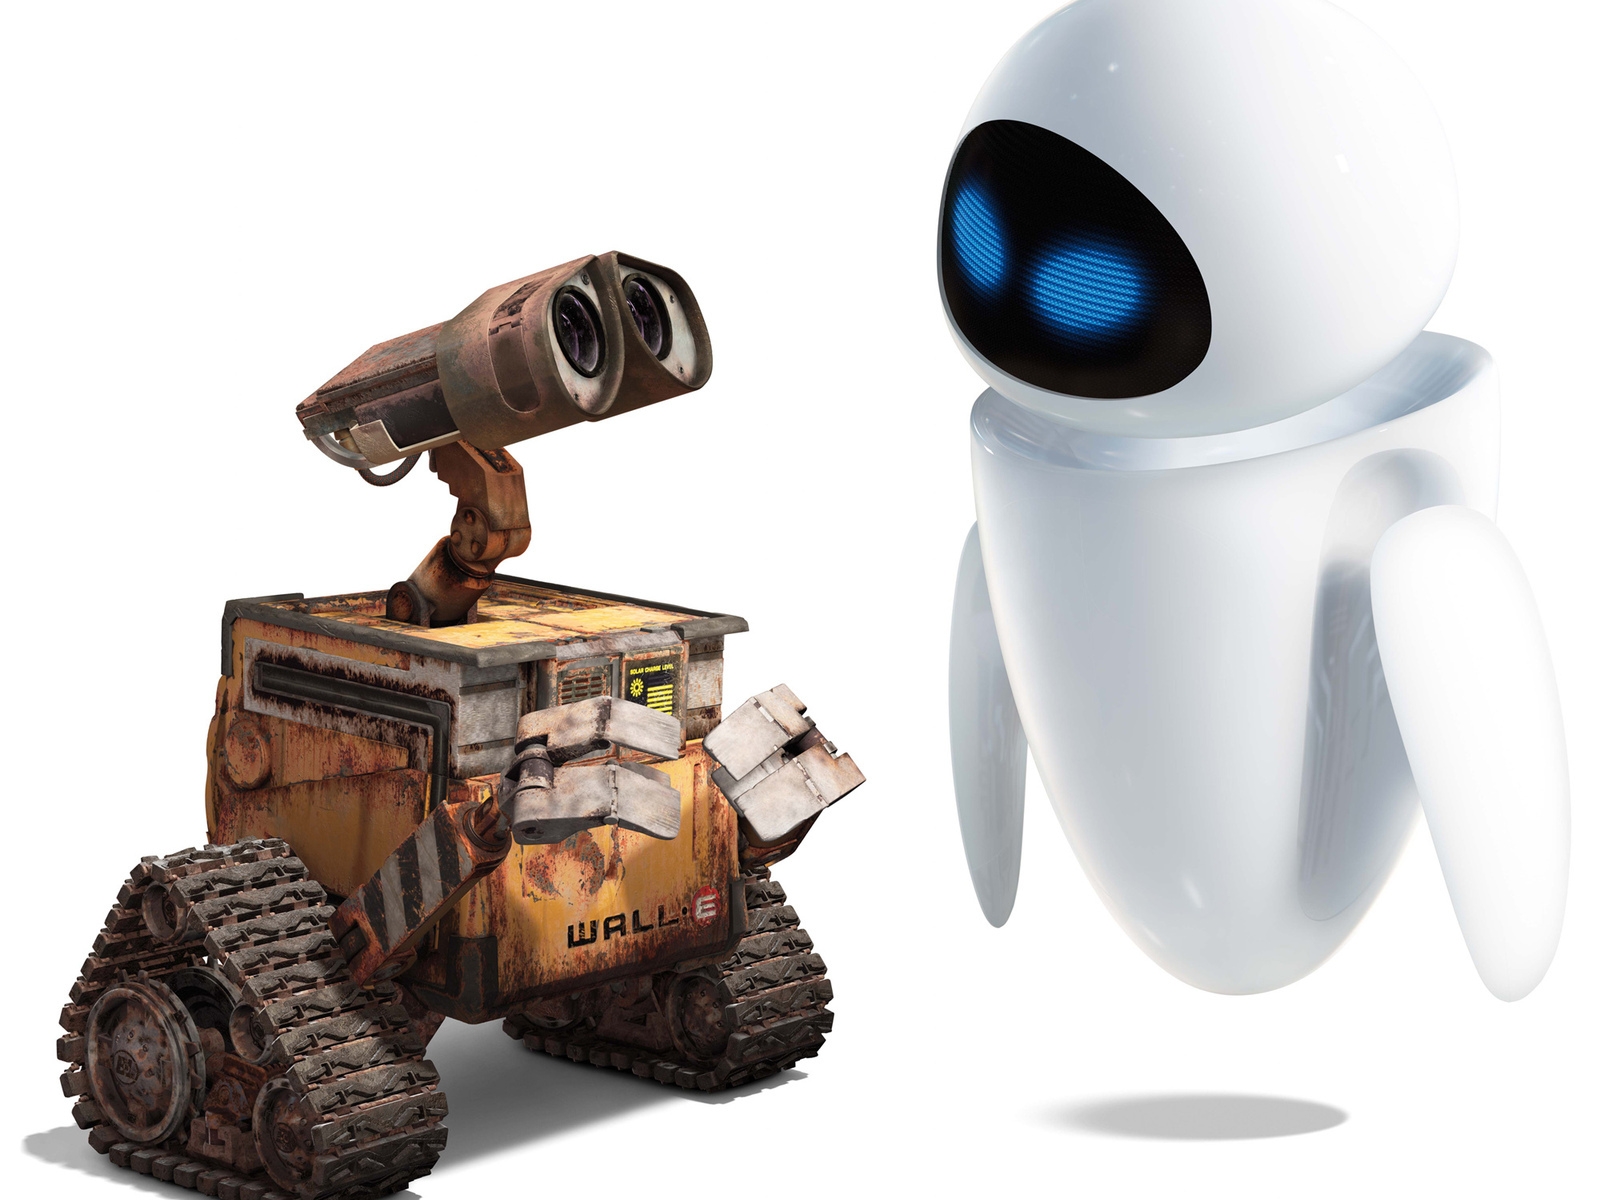 Walle Robots at 1600 x 1200 size.